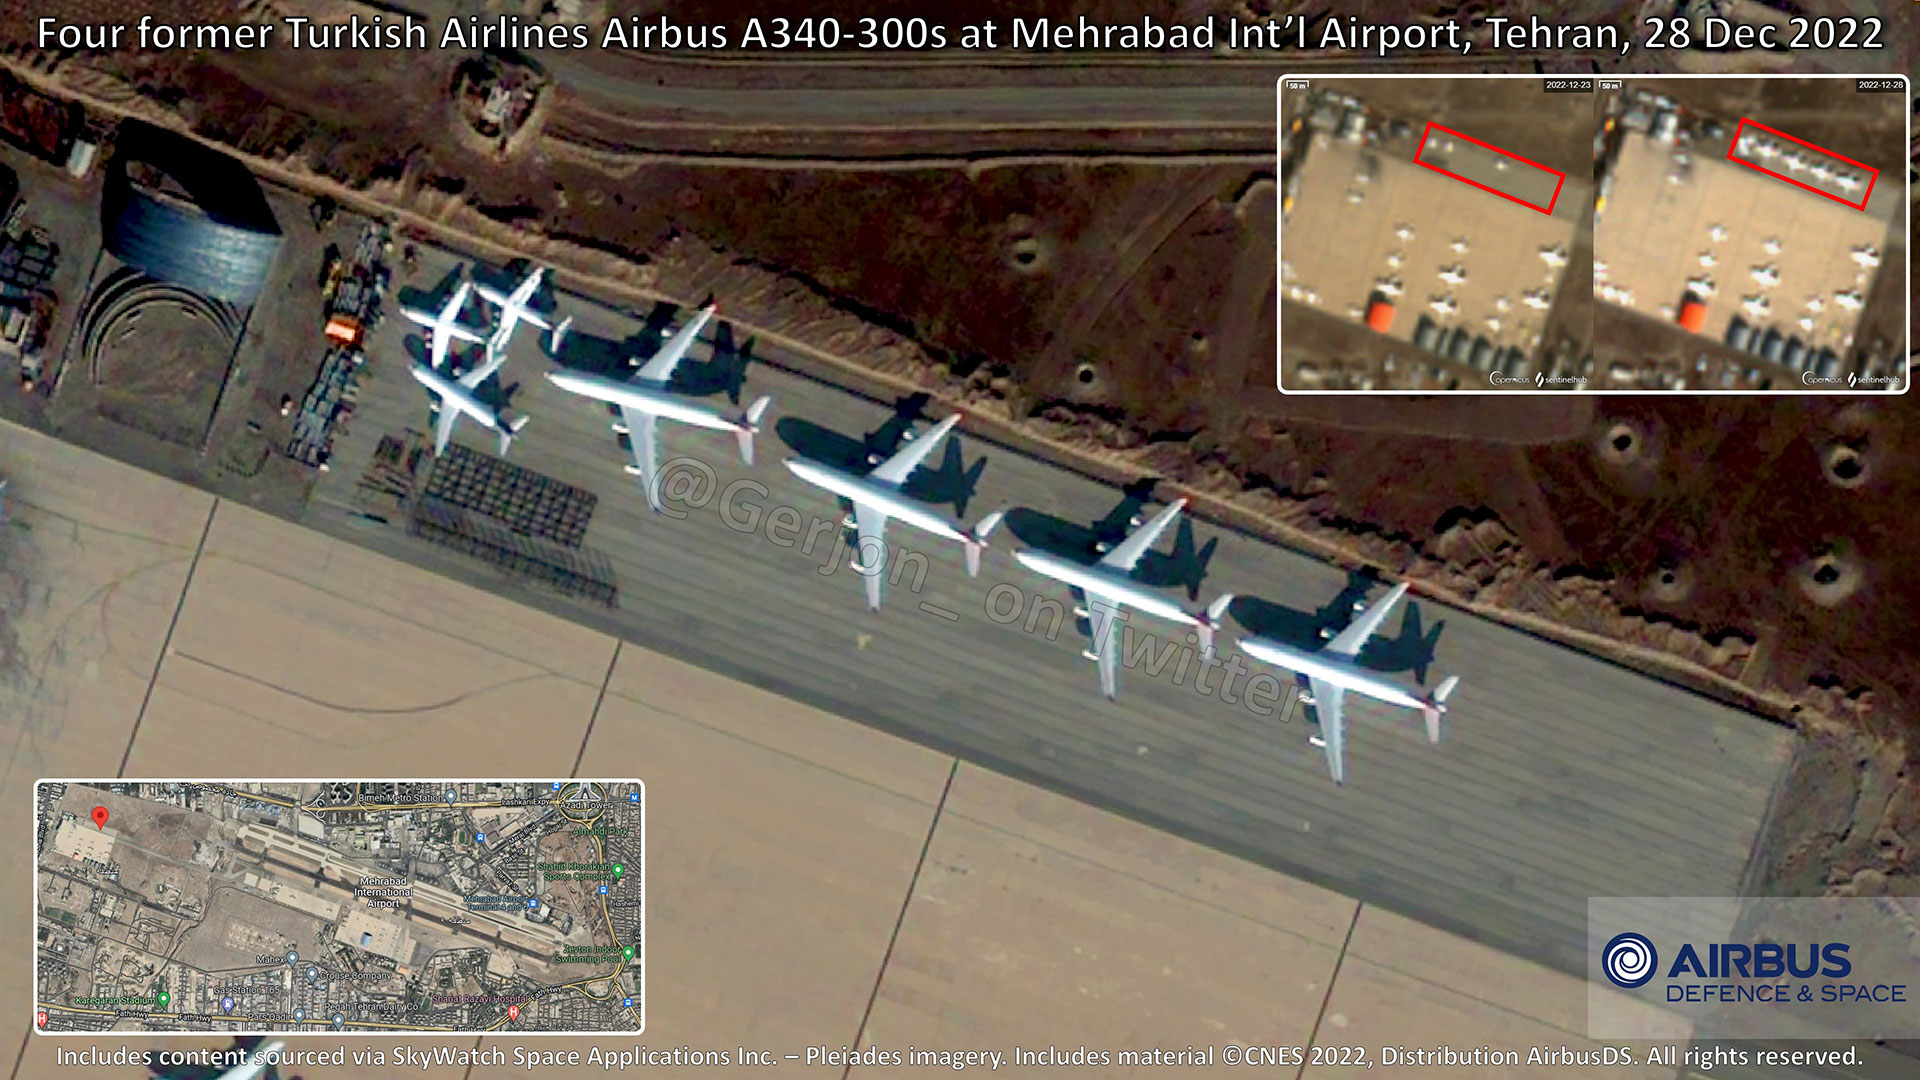 Airbus Security captured an image of 4 planes in Iran, which Gerjon replicated.  (Source: @Gerjon_/Twitter)